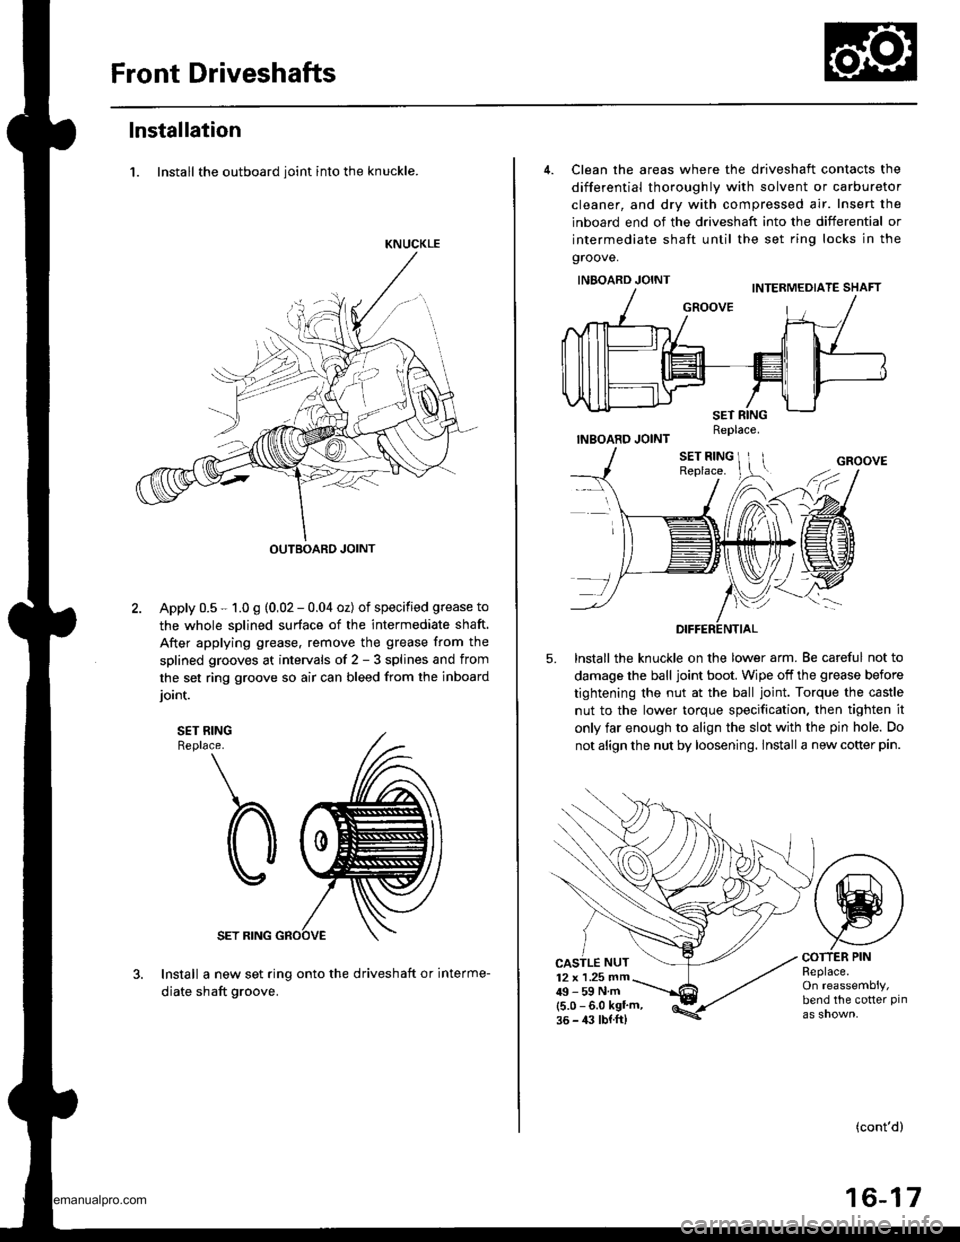 HONDA CR-V 1998 RD1-RD3 / 1.G Repair Manual 
Front Driveshafts
lnstallation
1. Install the outboard ioint into the knuckle.
KNUCKLE
OUTBOARD JOINT
Apply 0.5 - 1.0 g (0,02 - 0.04 oz) of specified grease to
the whole sDlined surface of the interm